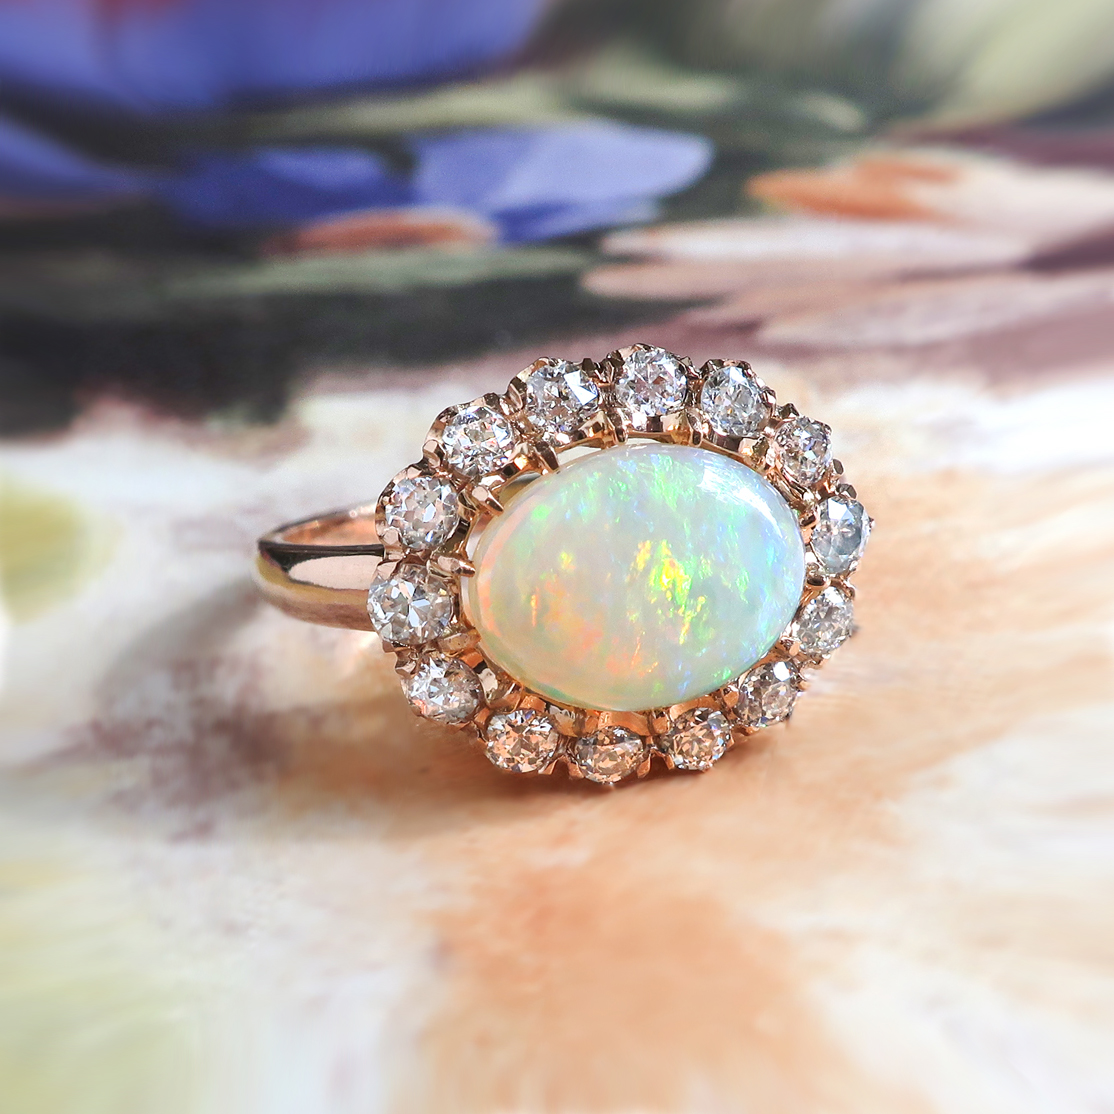 Antique Diamond Ring Victorian t.w. Australian Crystal Opal & Old European Cut Halo Engagement Birthstone Ring 18k Rose Gold | Antique Estate Jewelry | Jewelry